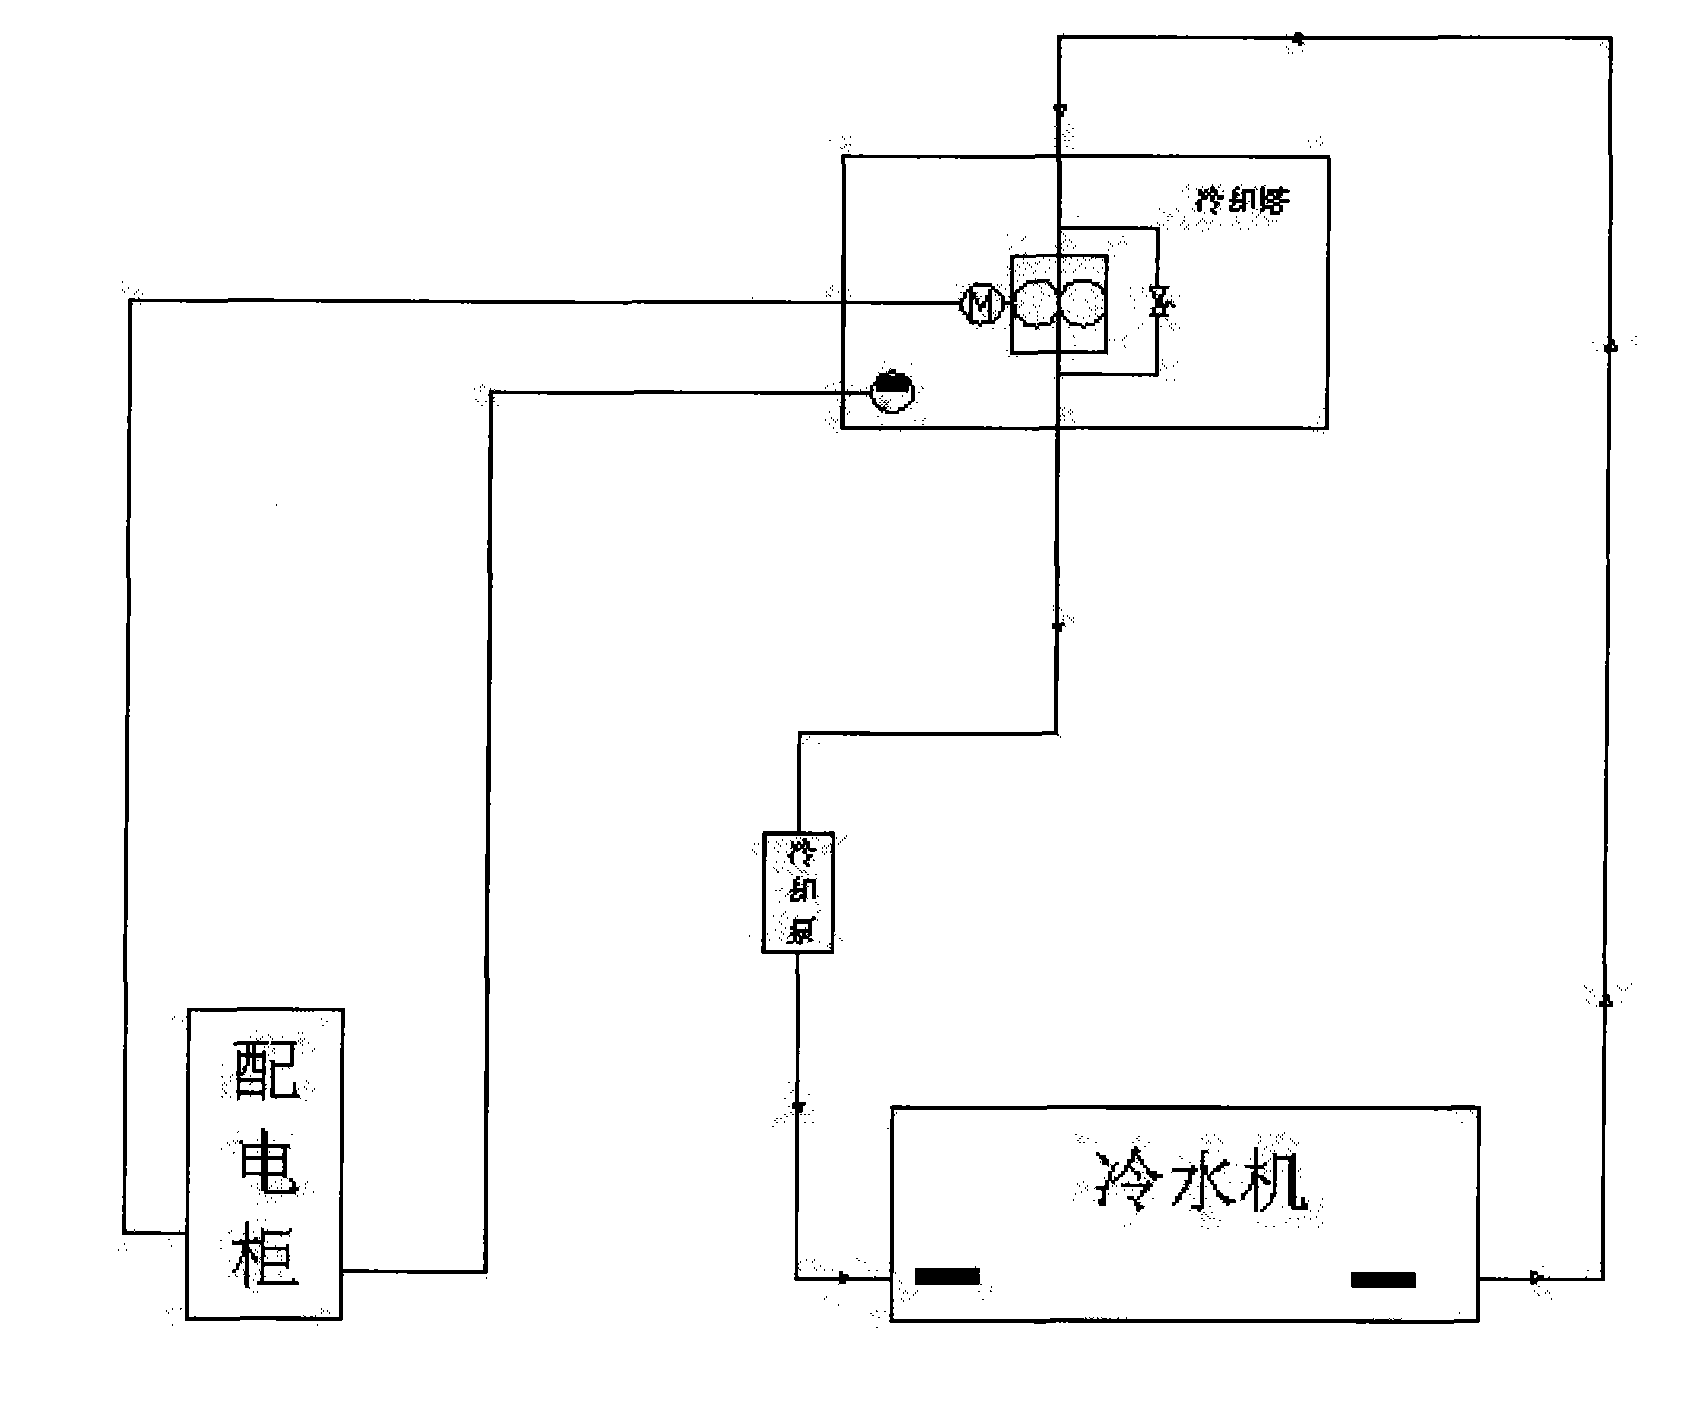 Automatic temperature control device for cooling tower fan